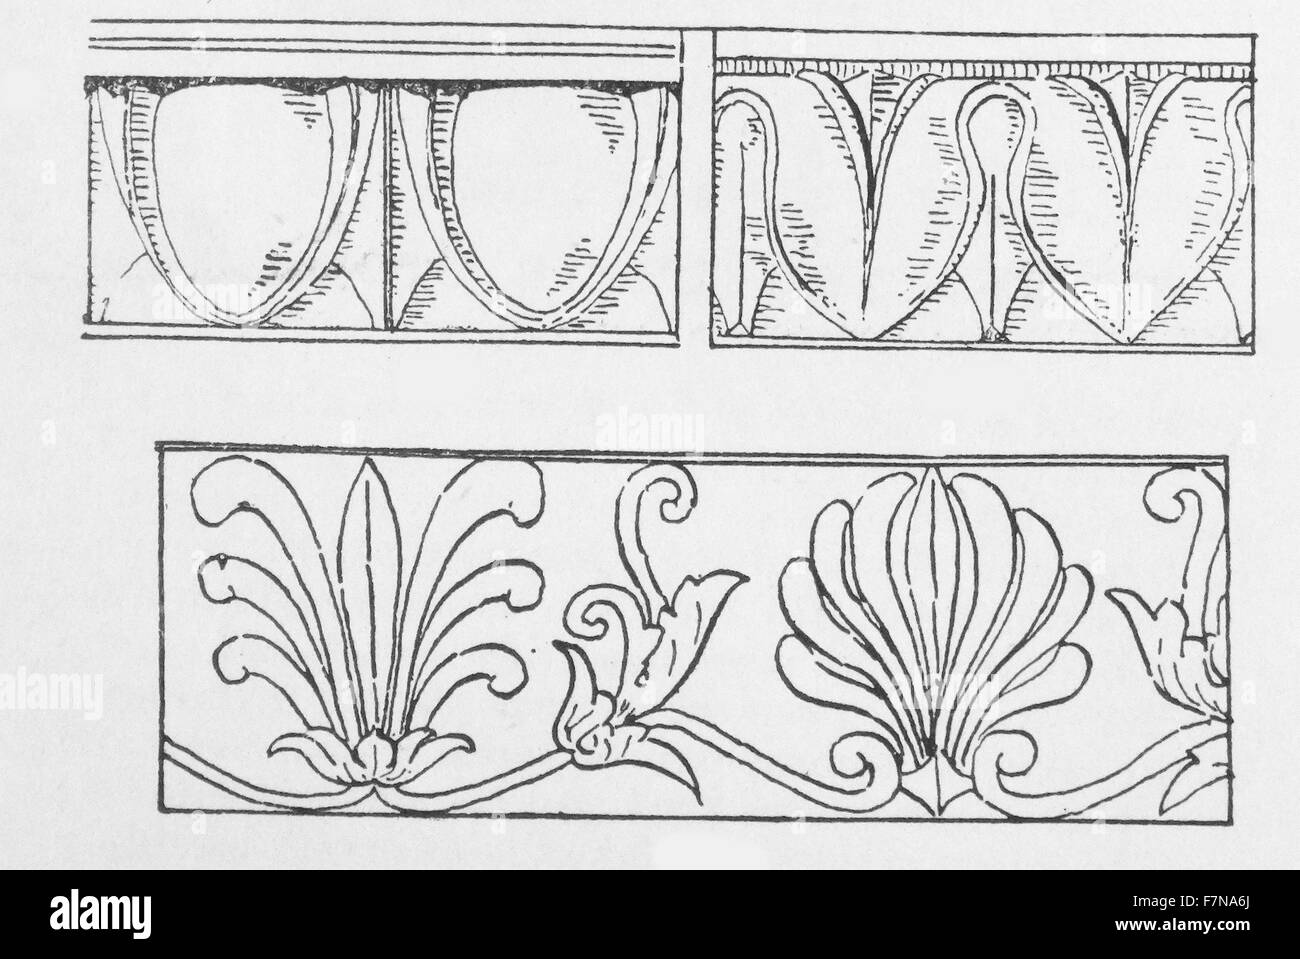 Illustration from a book depicting different types of mouldings including an Egg and Tongue moulding, Leaf and Tongue Moulding and Honeysuckle Carving. Dated 1913 Stock Photo